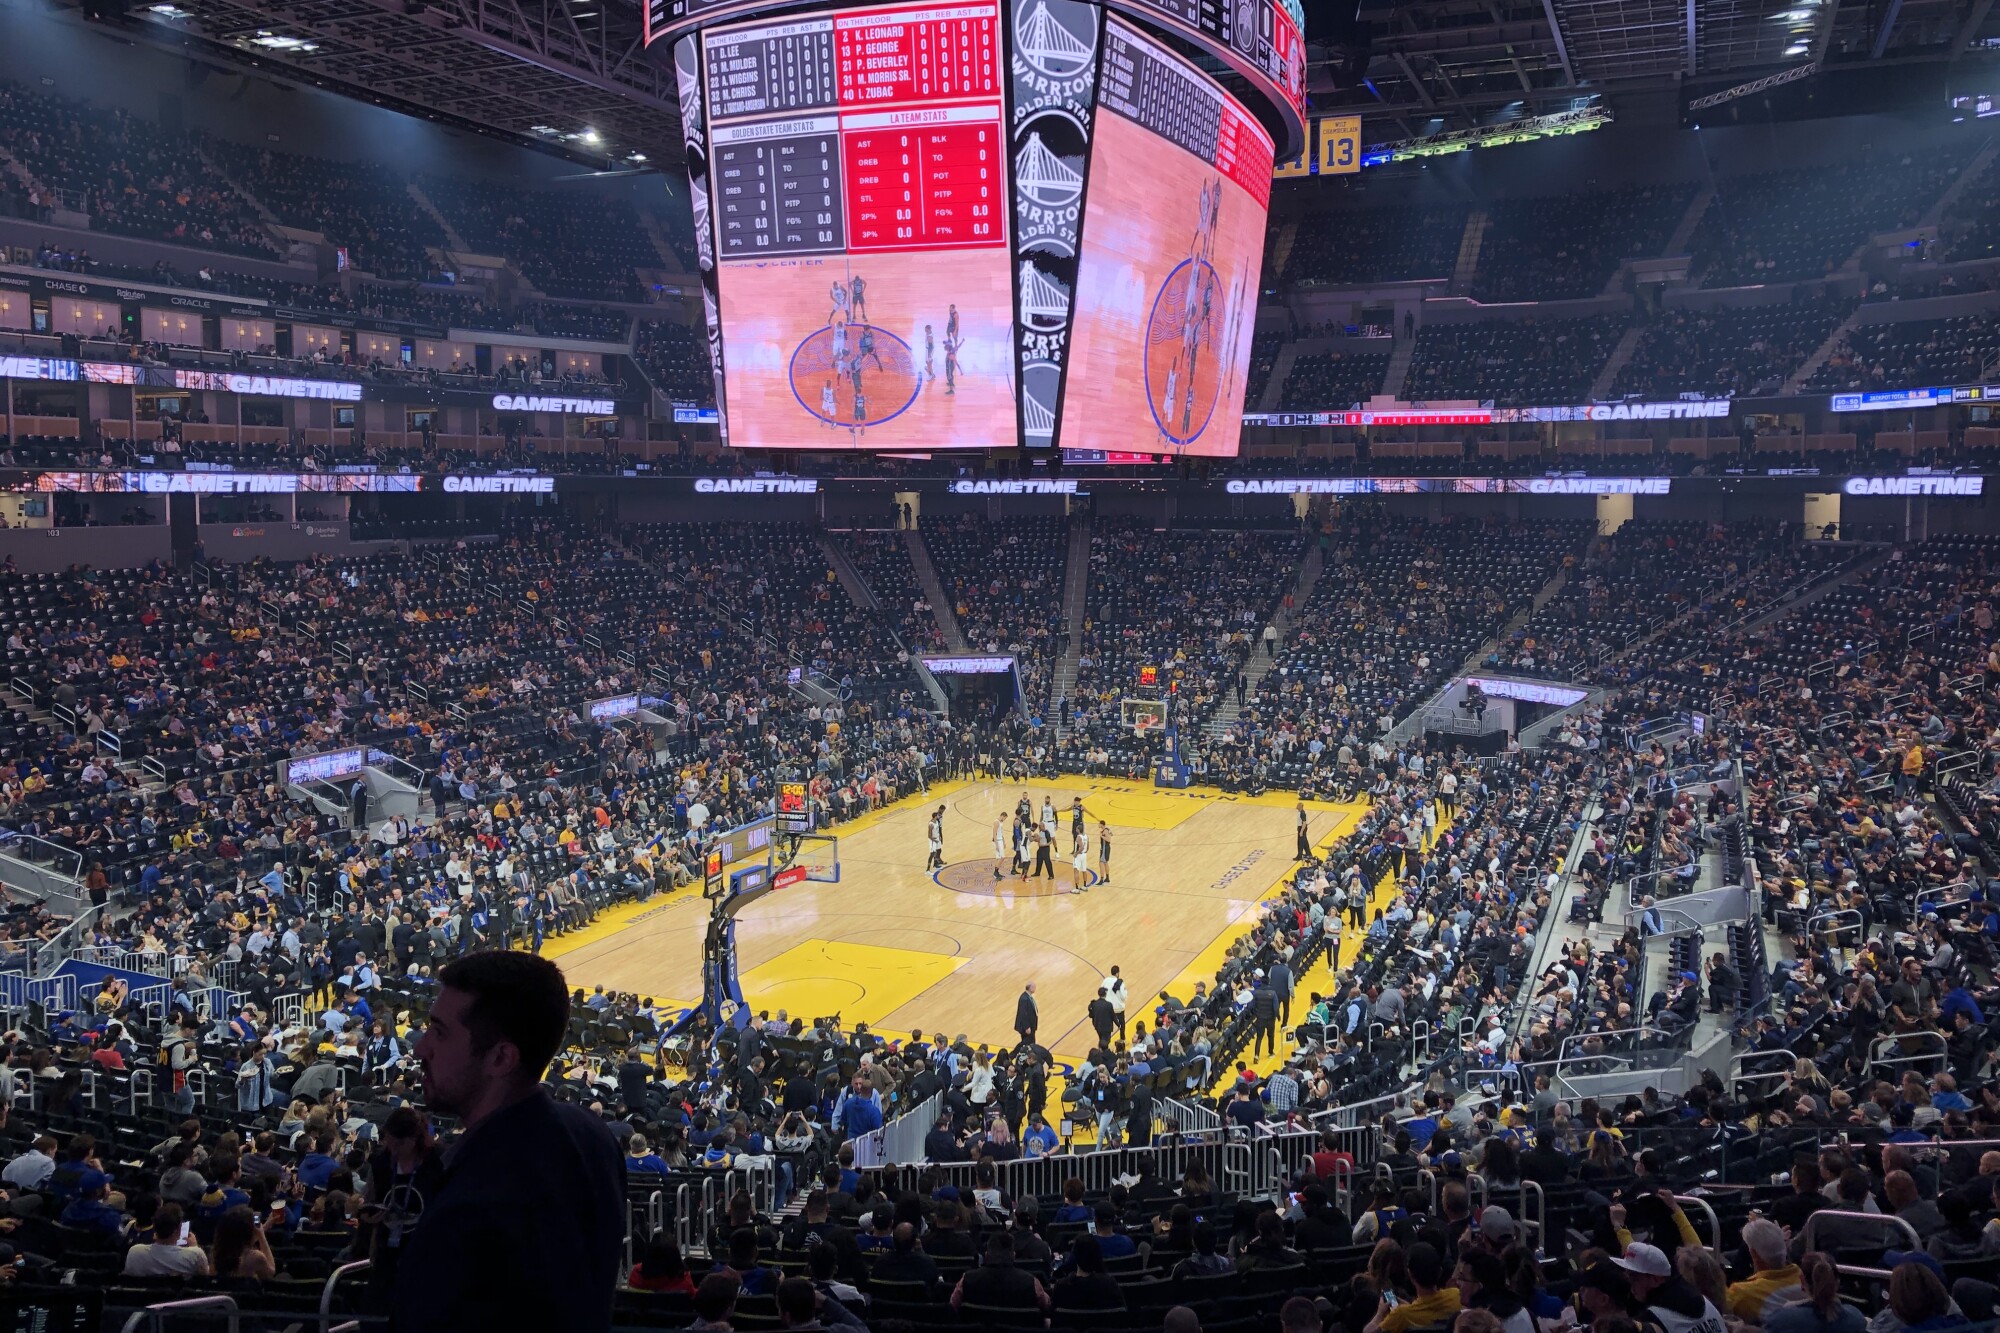 The Clippers play the Golden State Warriors in a half-full Chase Center on March 10, 2020.